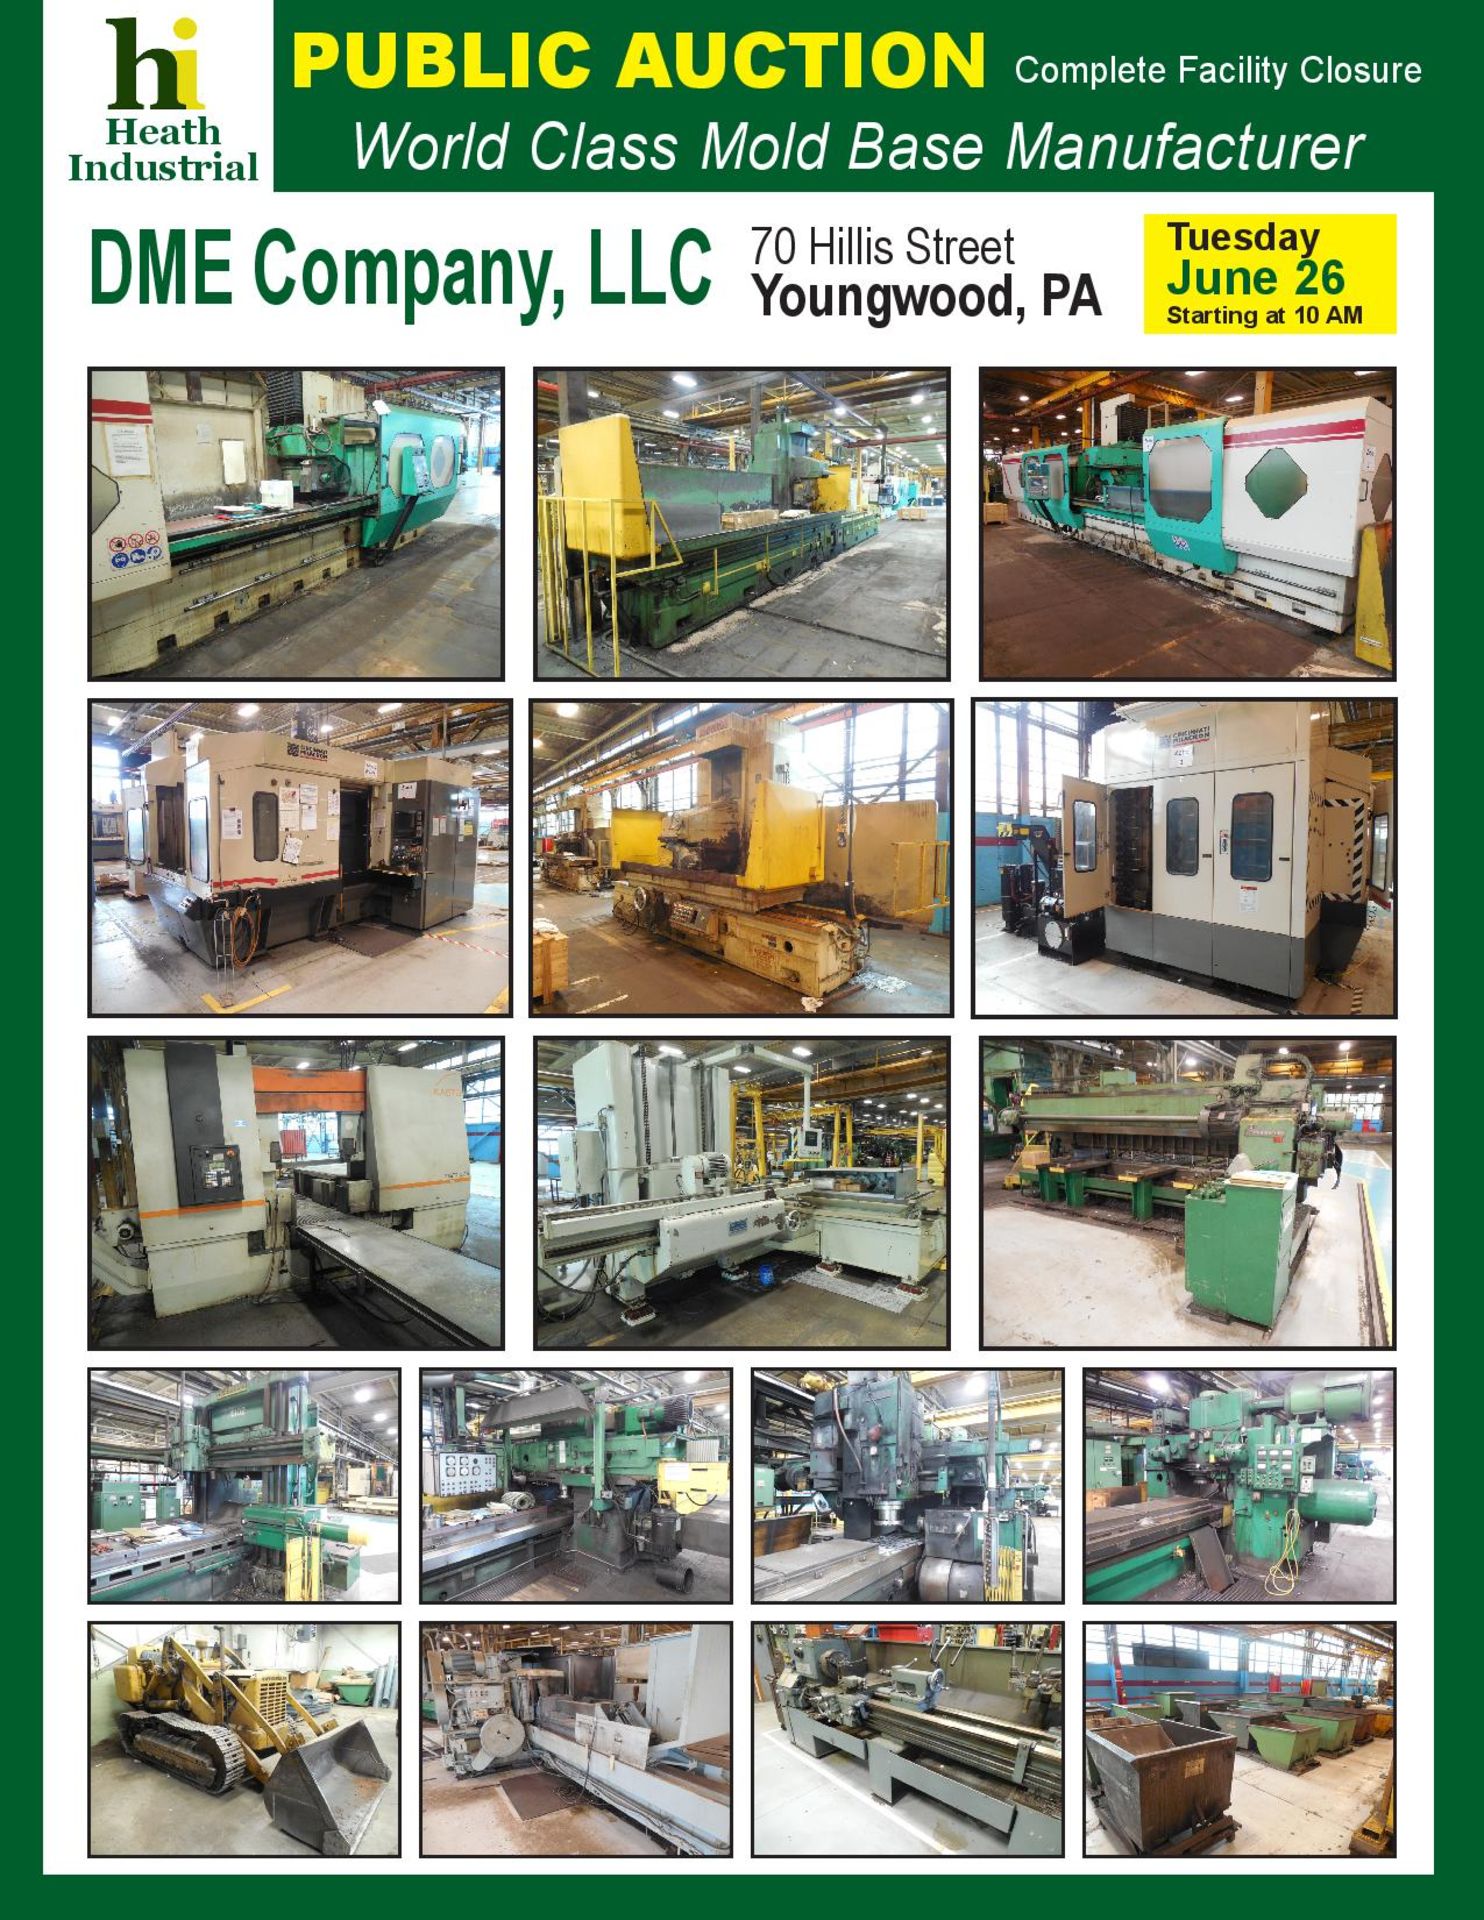 Full Catalog Posted. DME Company, LLC - Featuring (9) Large Capacity Grinders, (3) HMC's,Mills